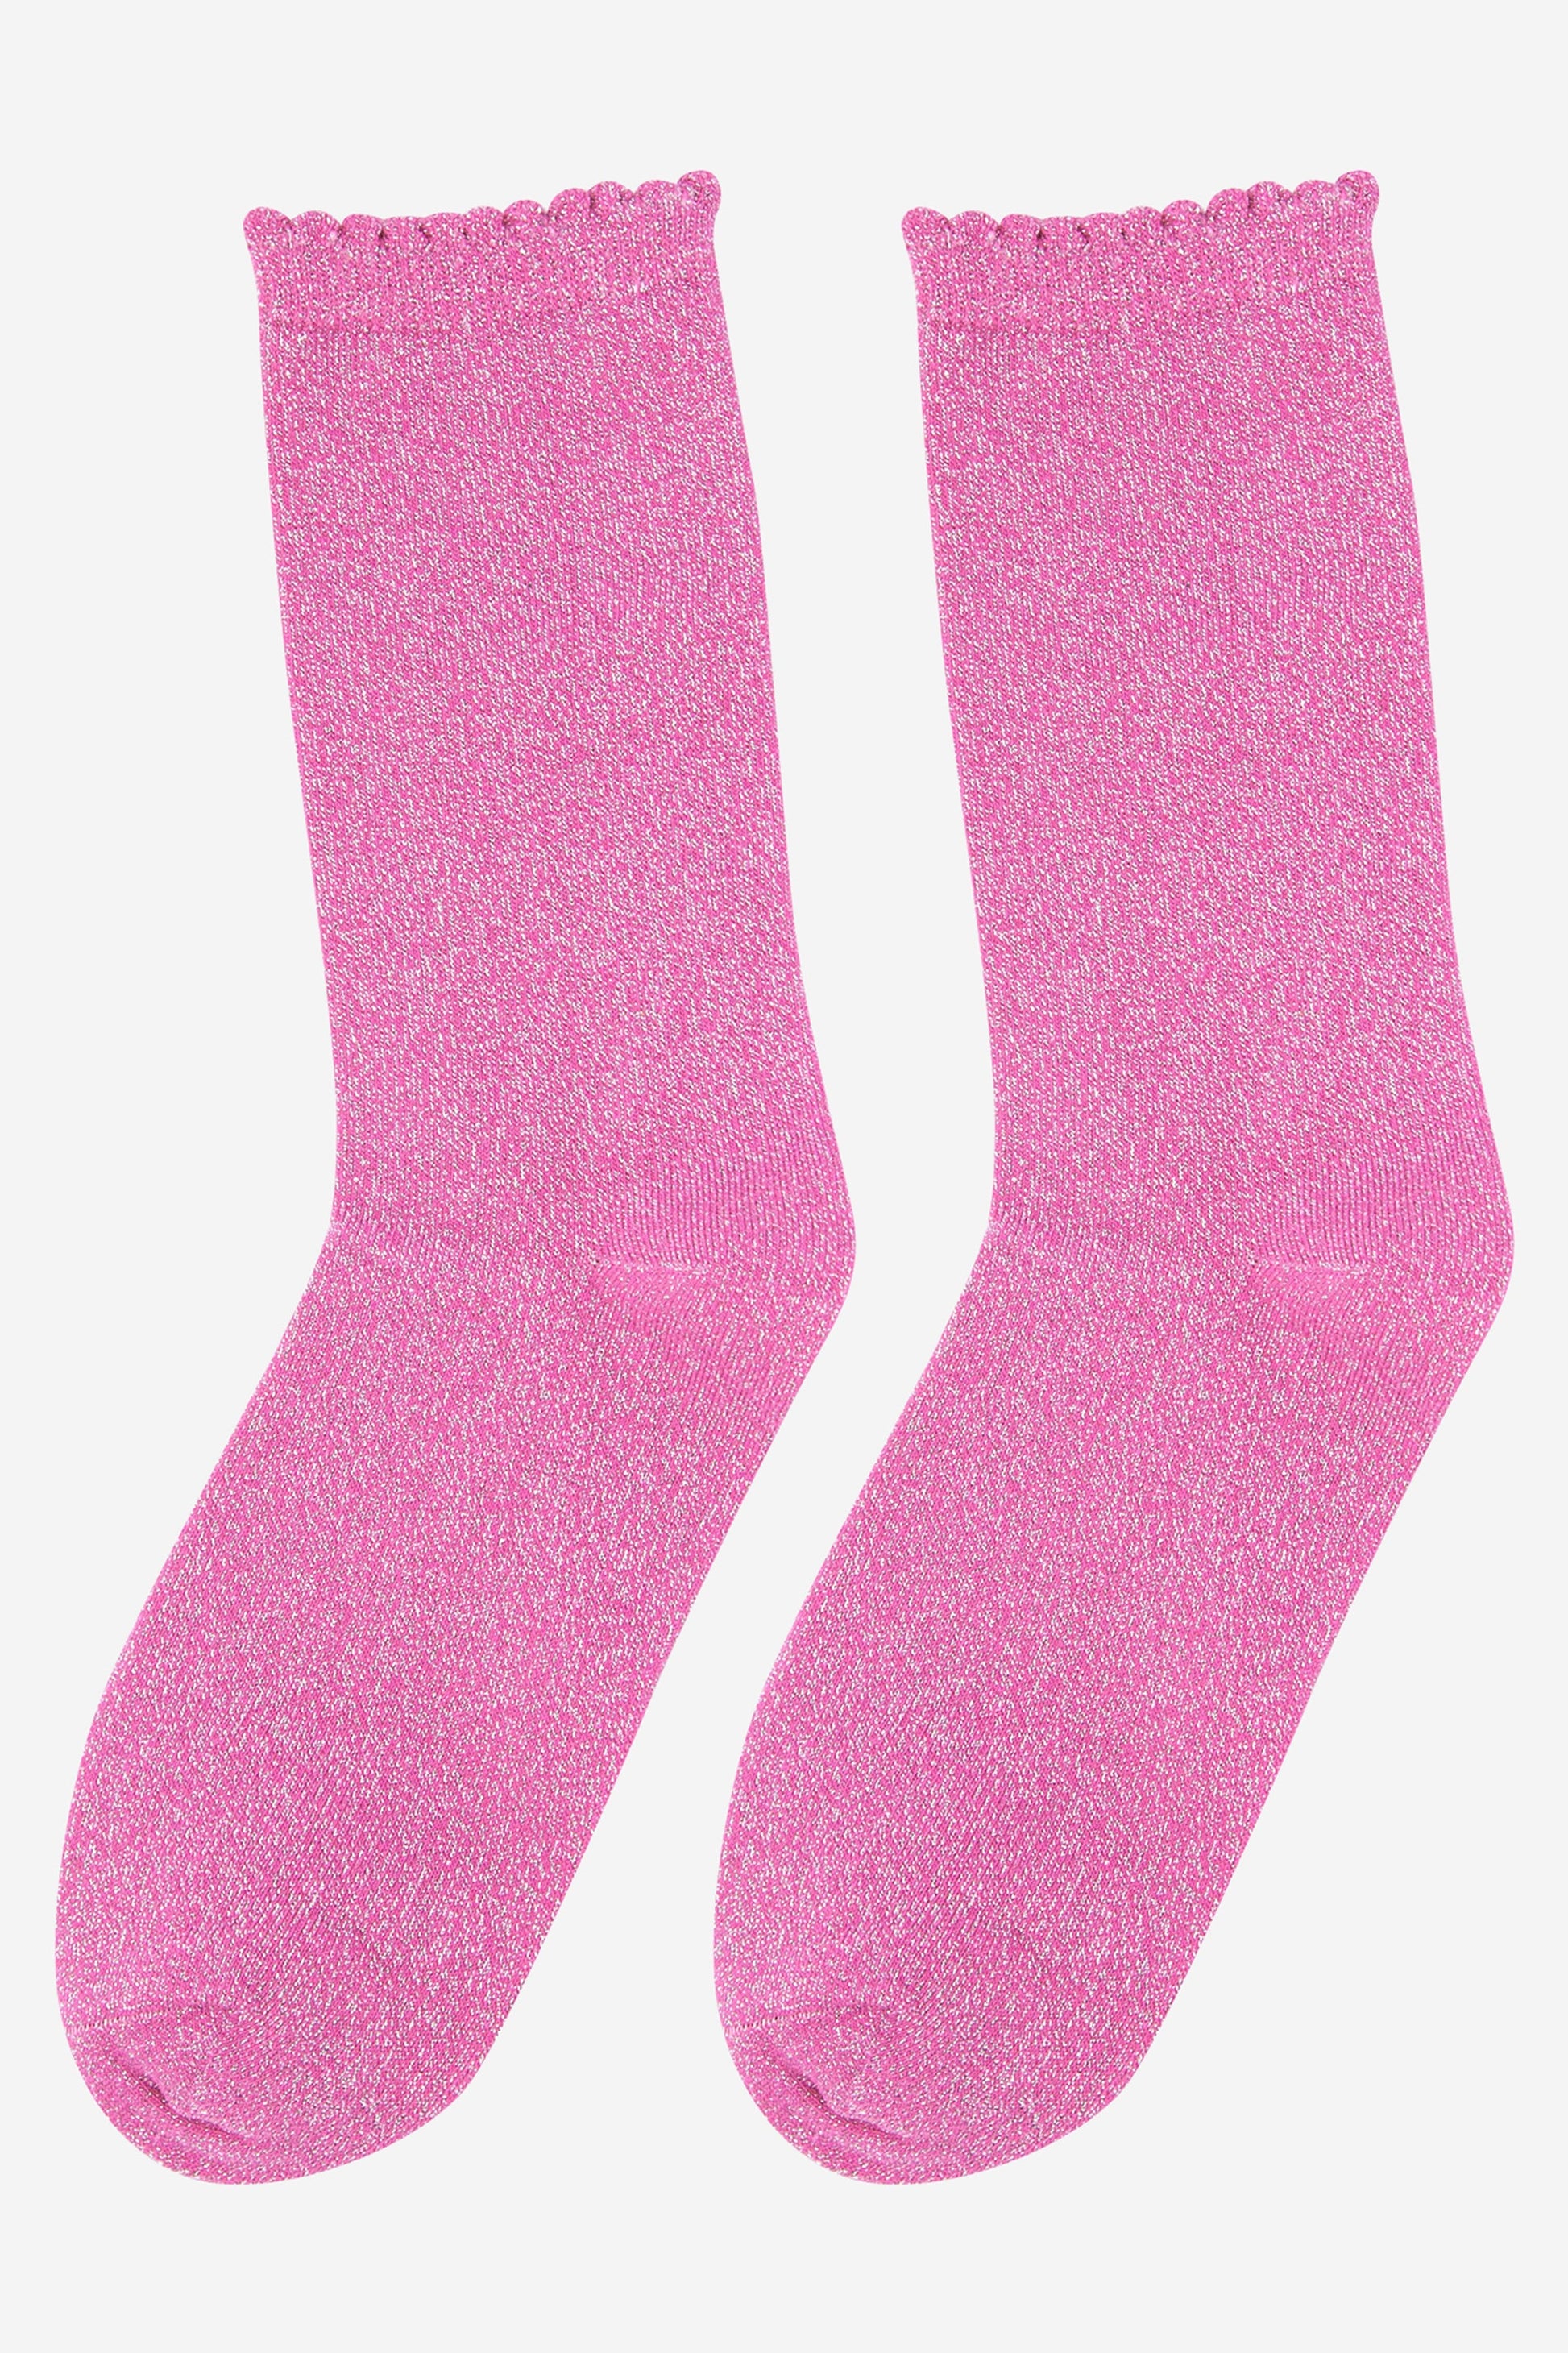 pink sparkly glitter socks with scalloped cuffs and an all over shimmer